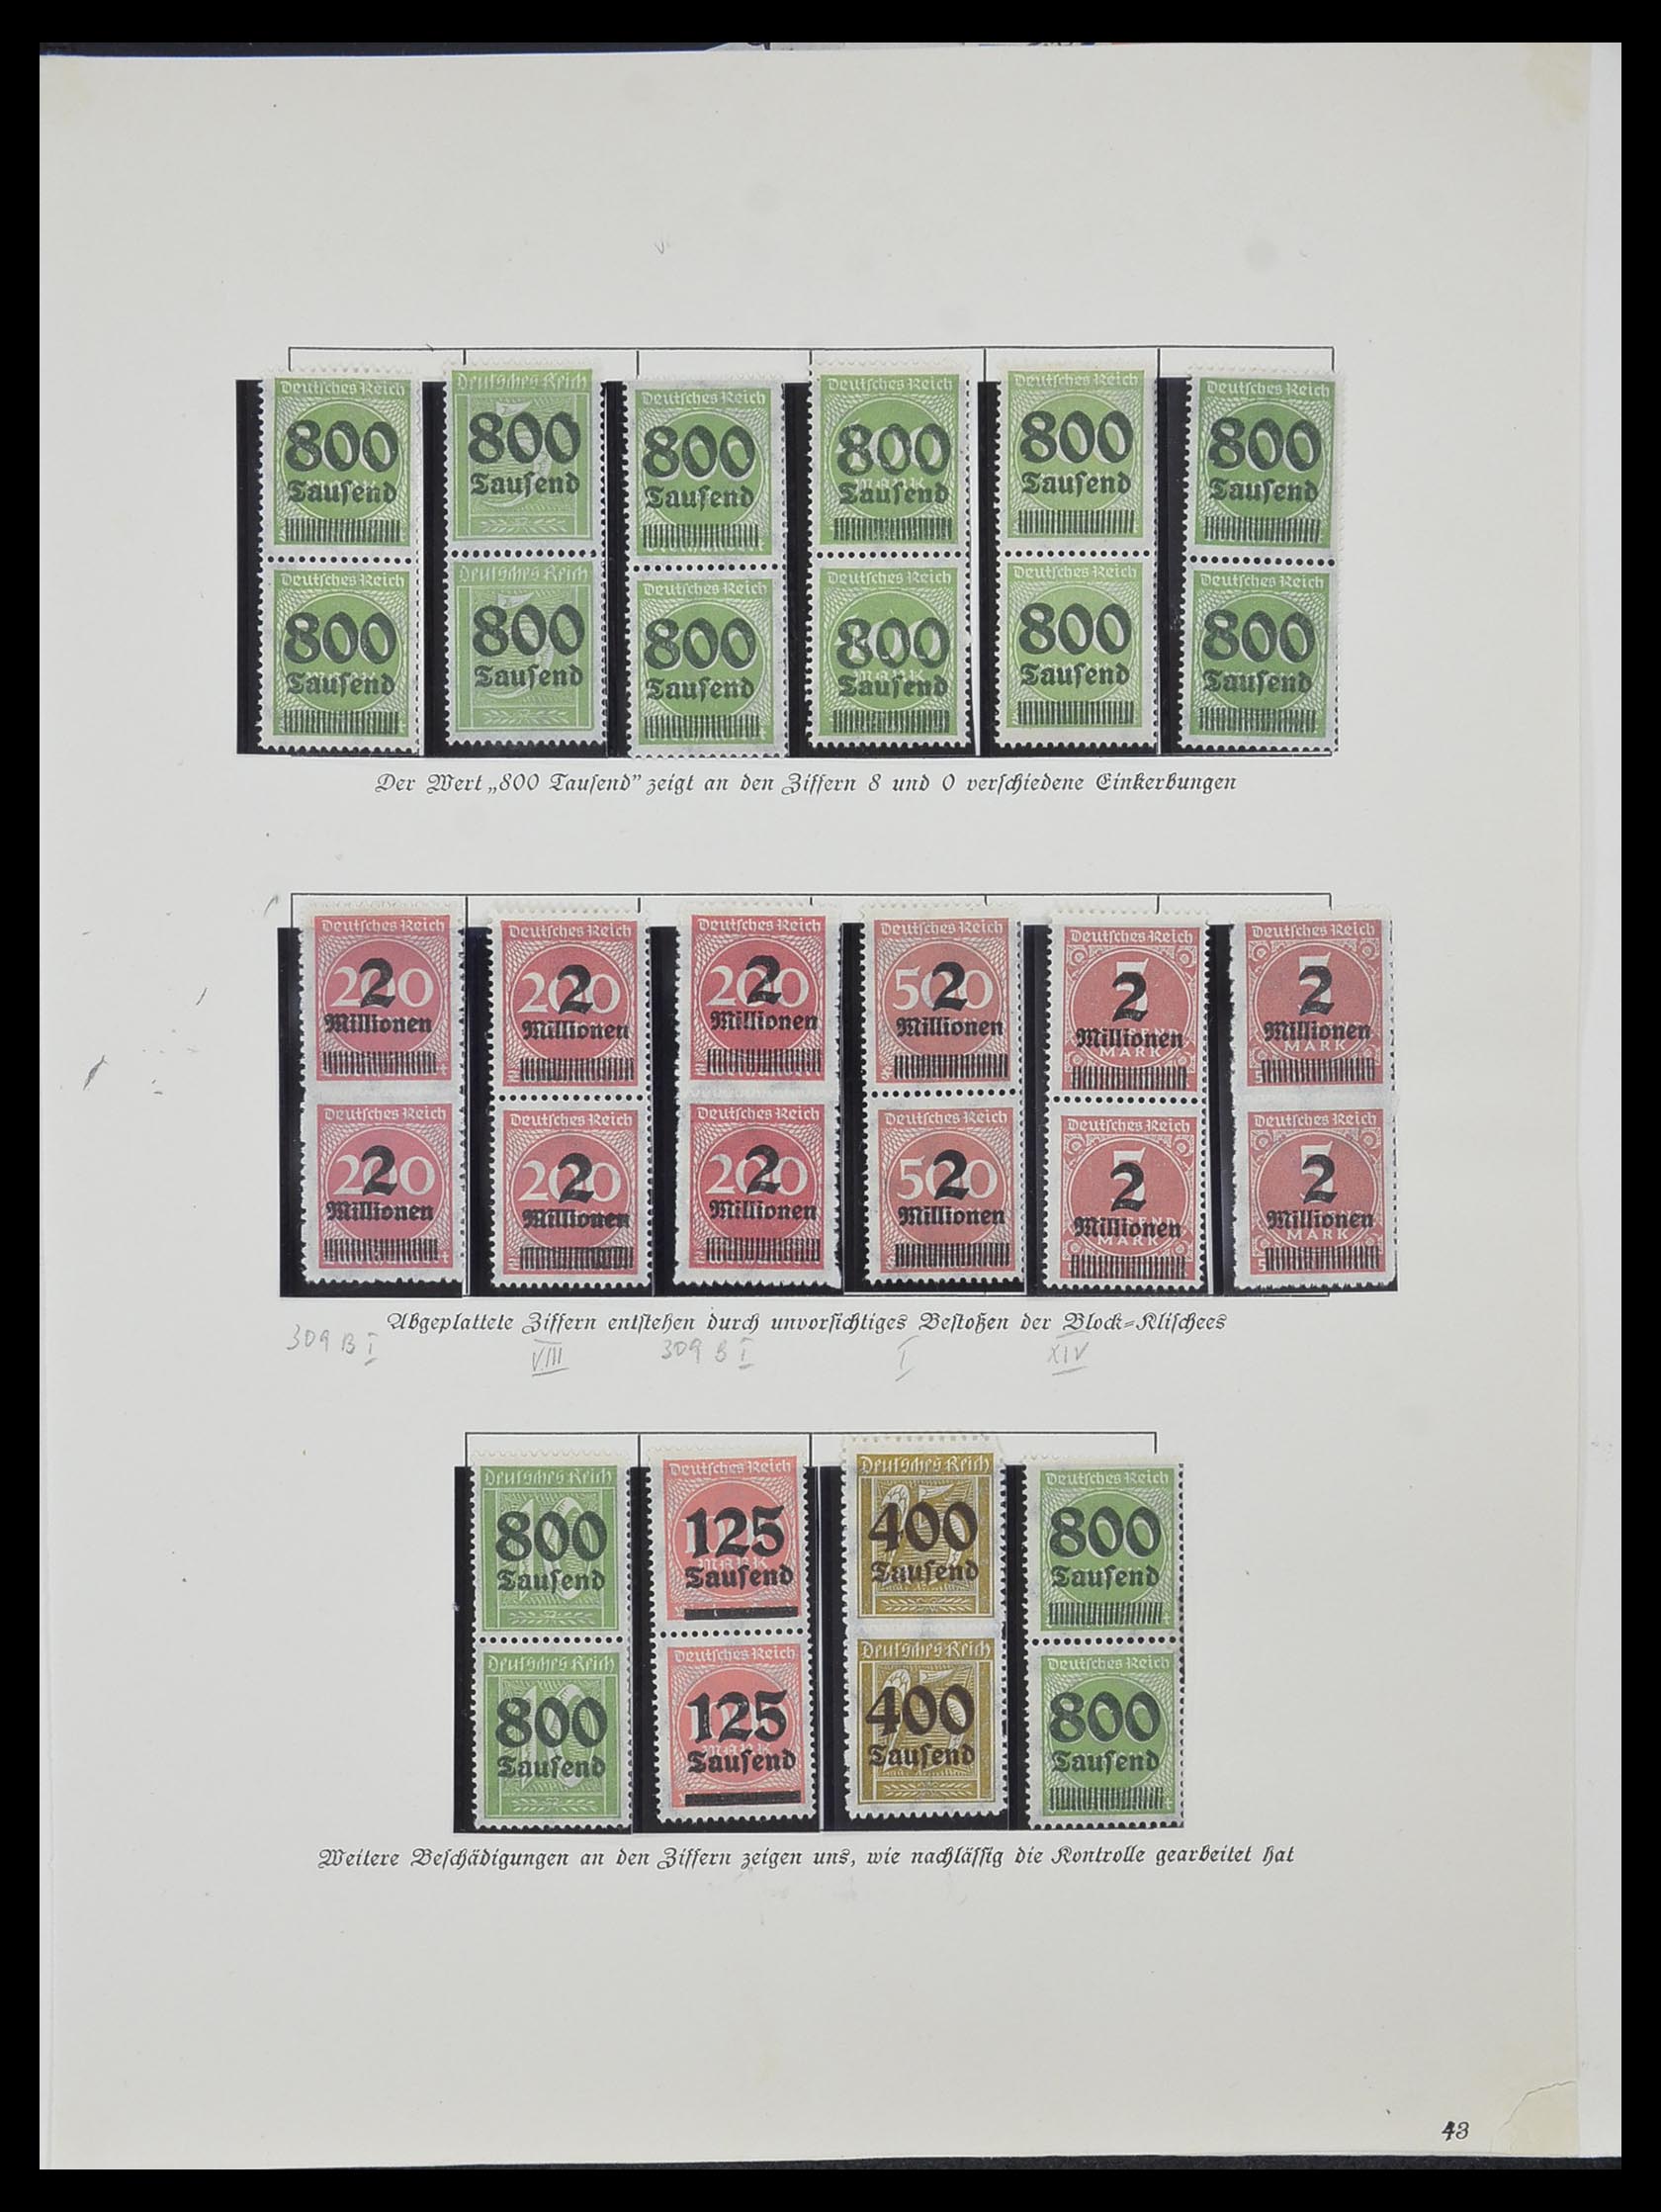 33957 020 - Stamp collection 33957 German Reich infla 1923.